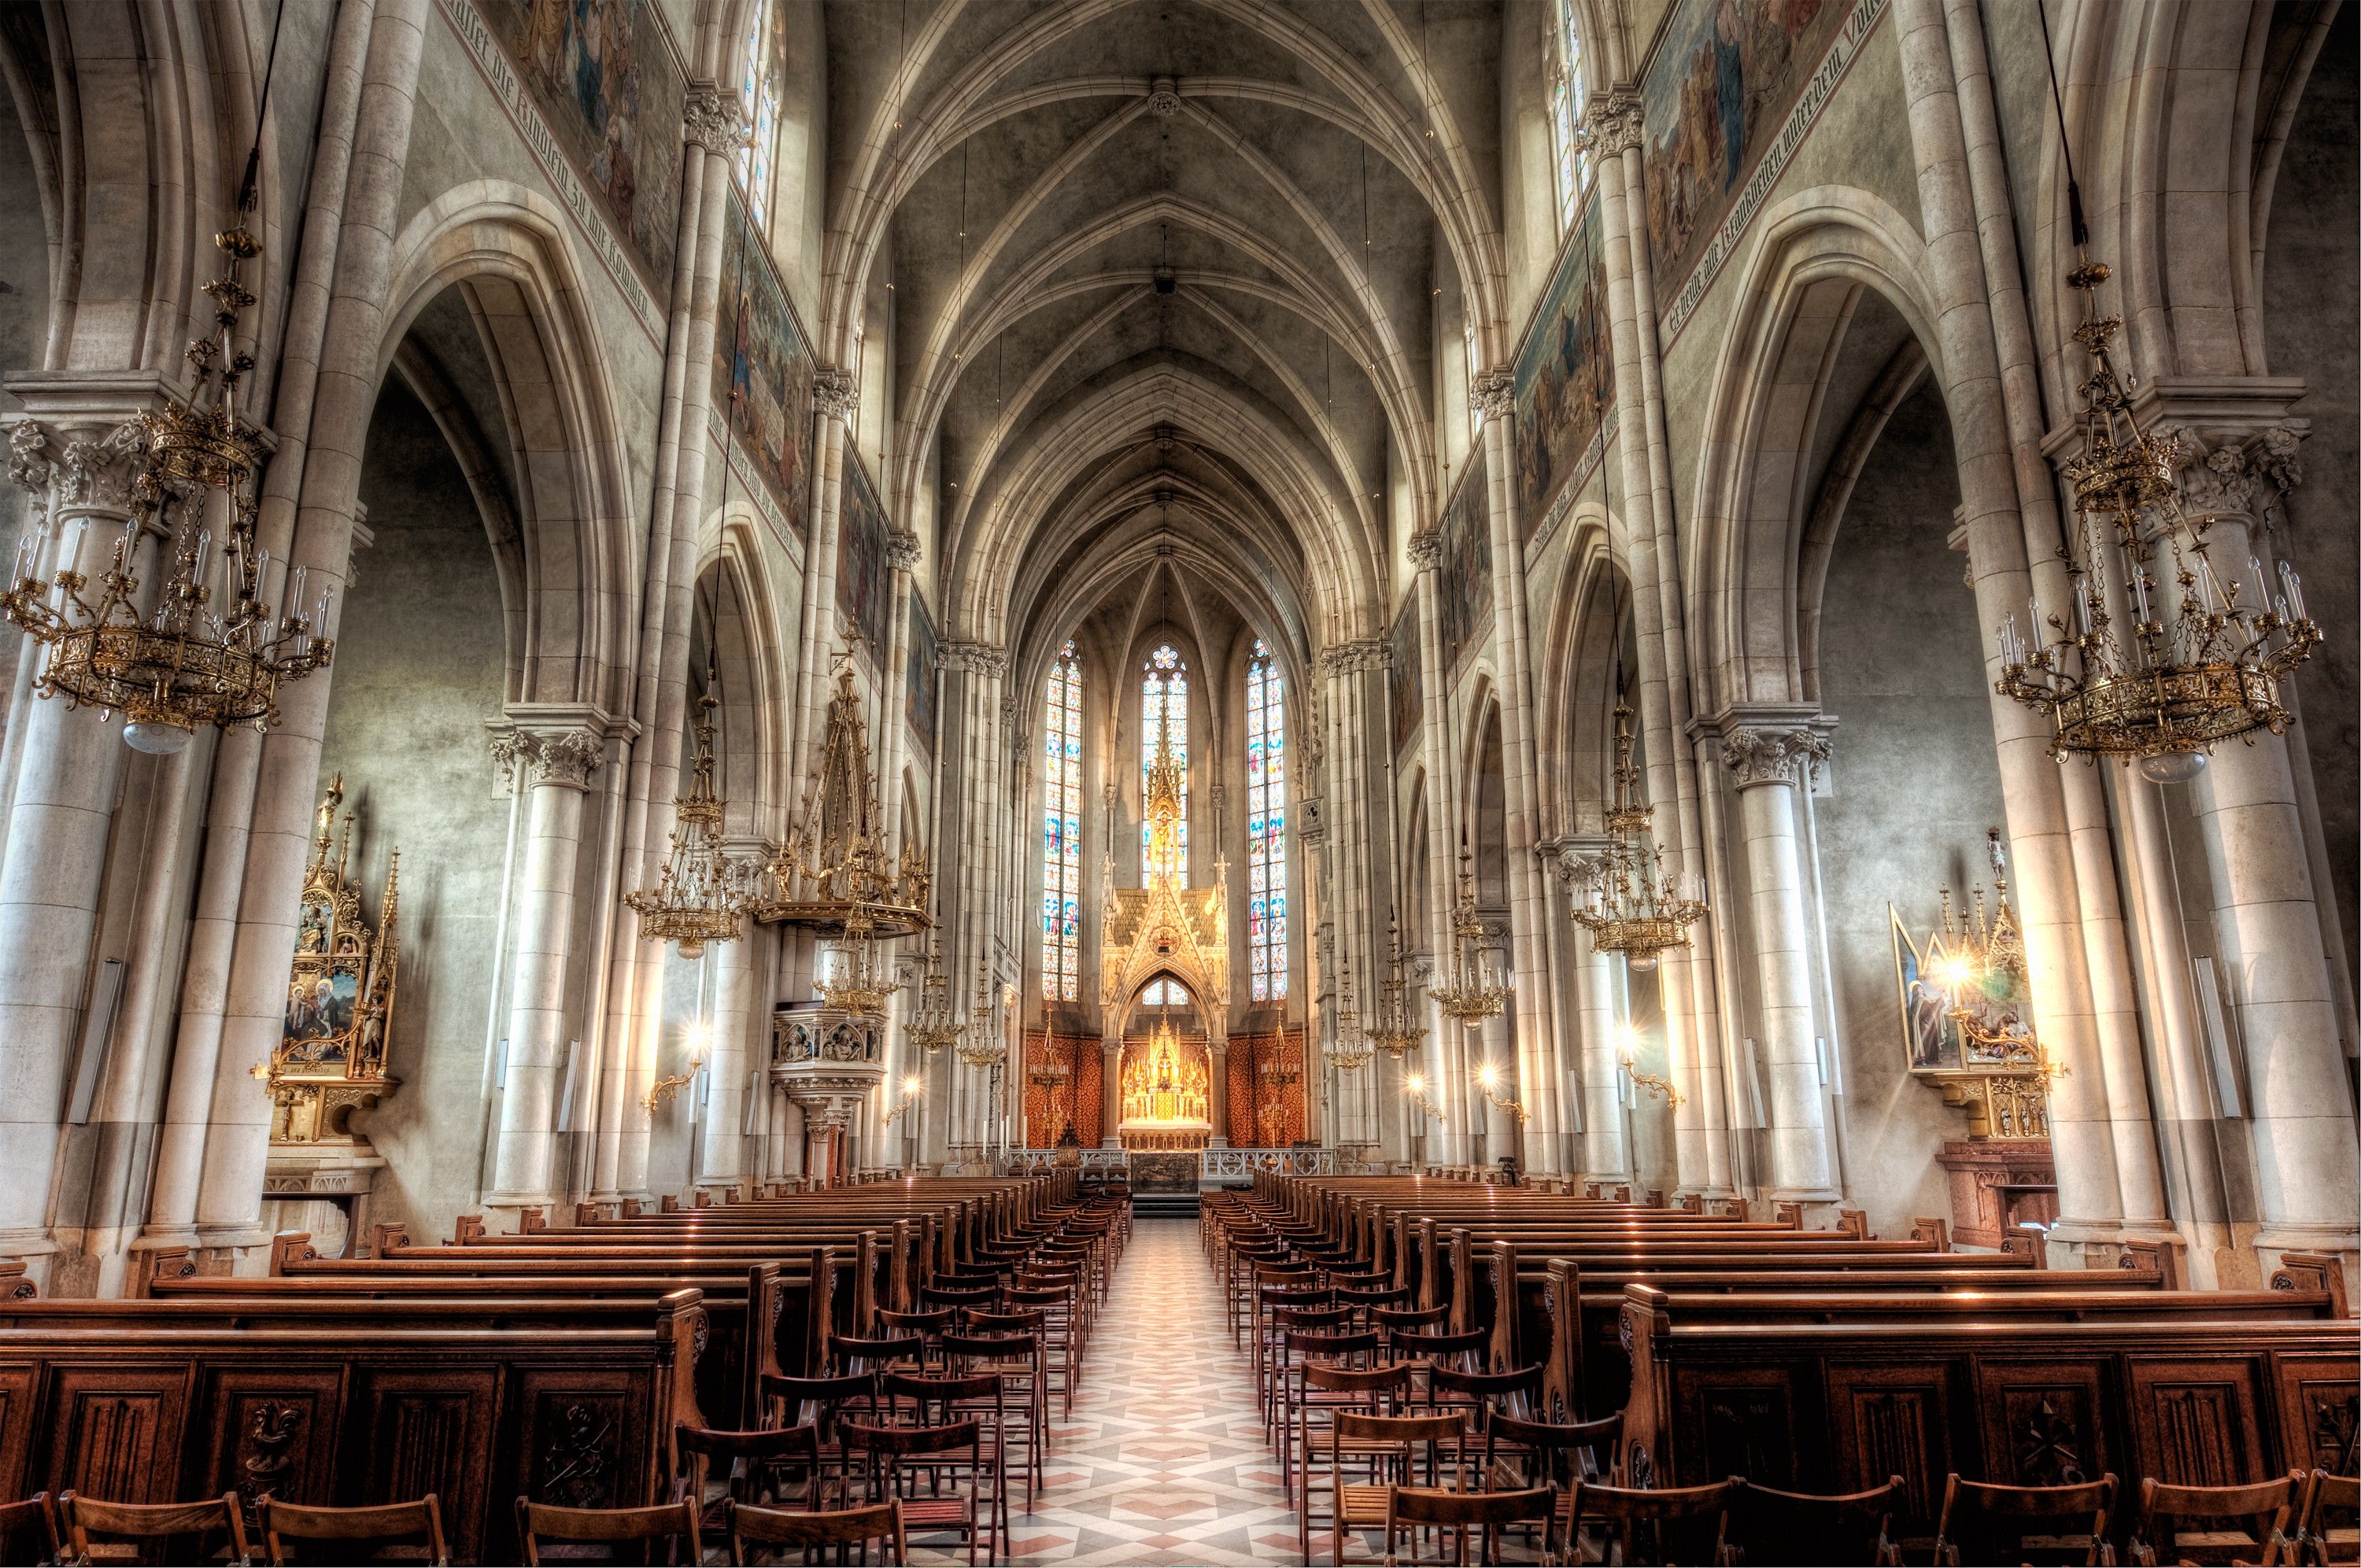 cathedral, religious, arch, architecture, chair, chandelier, cathedrals High Definition image